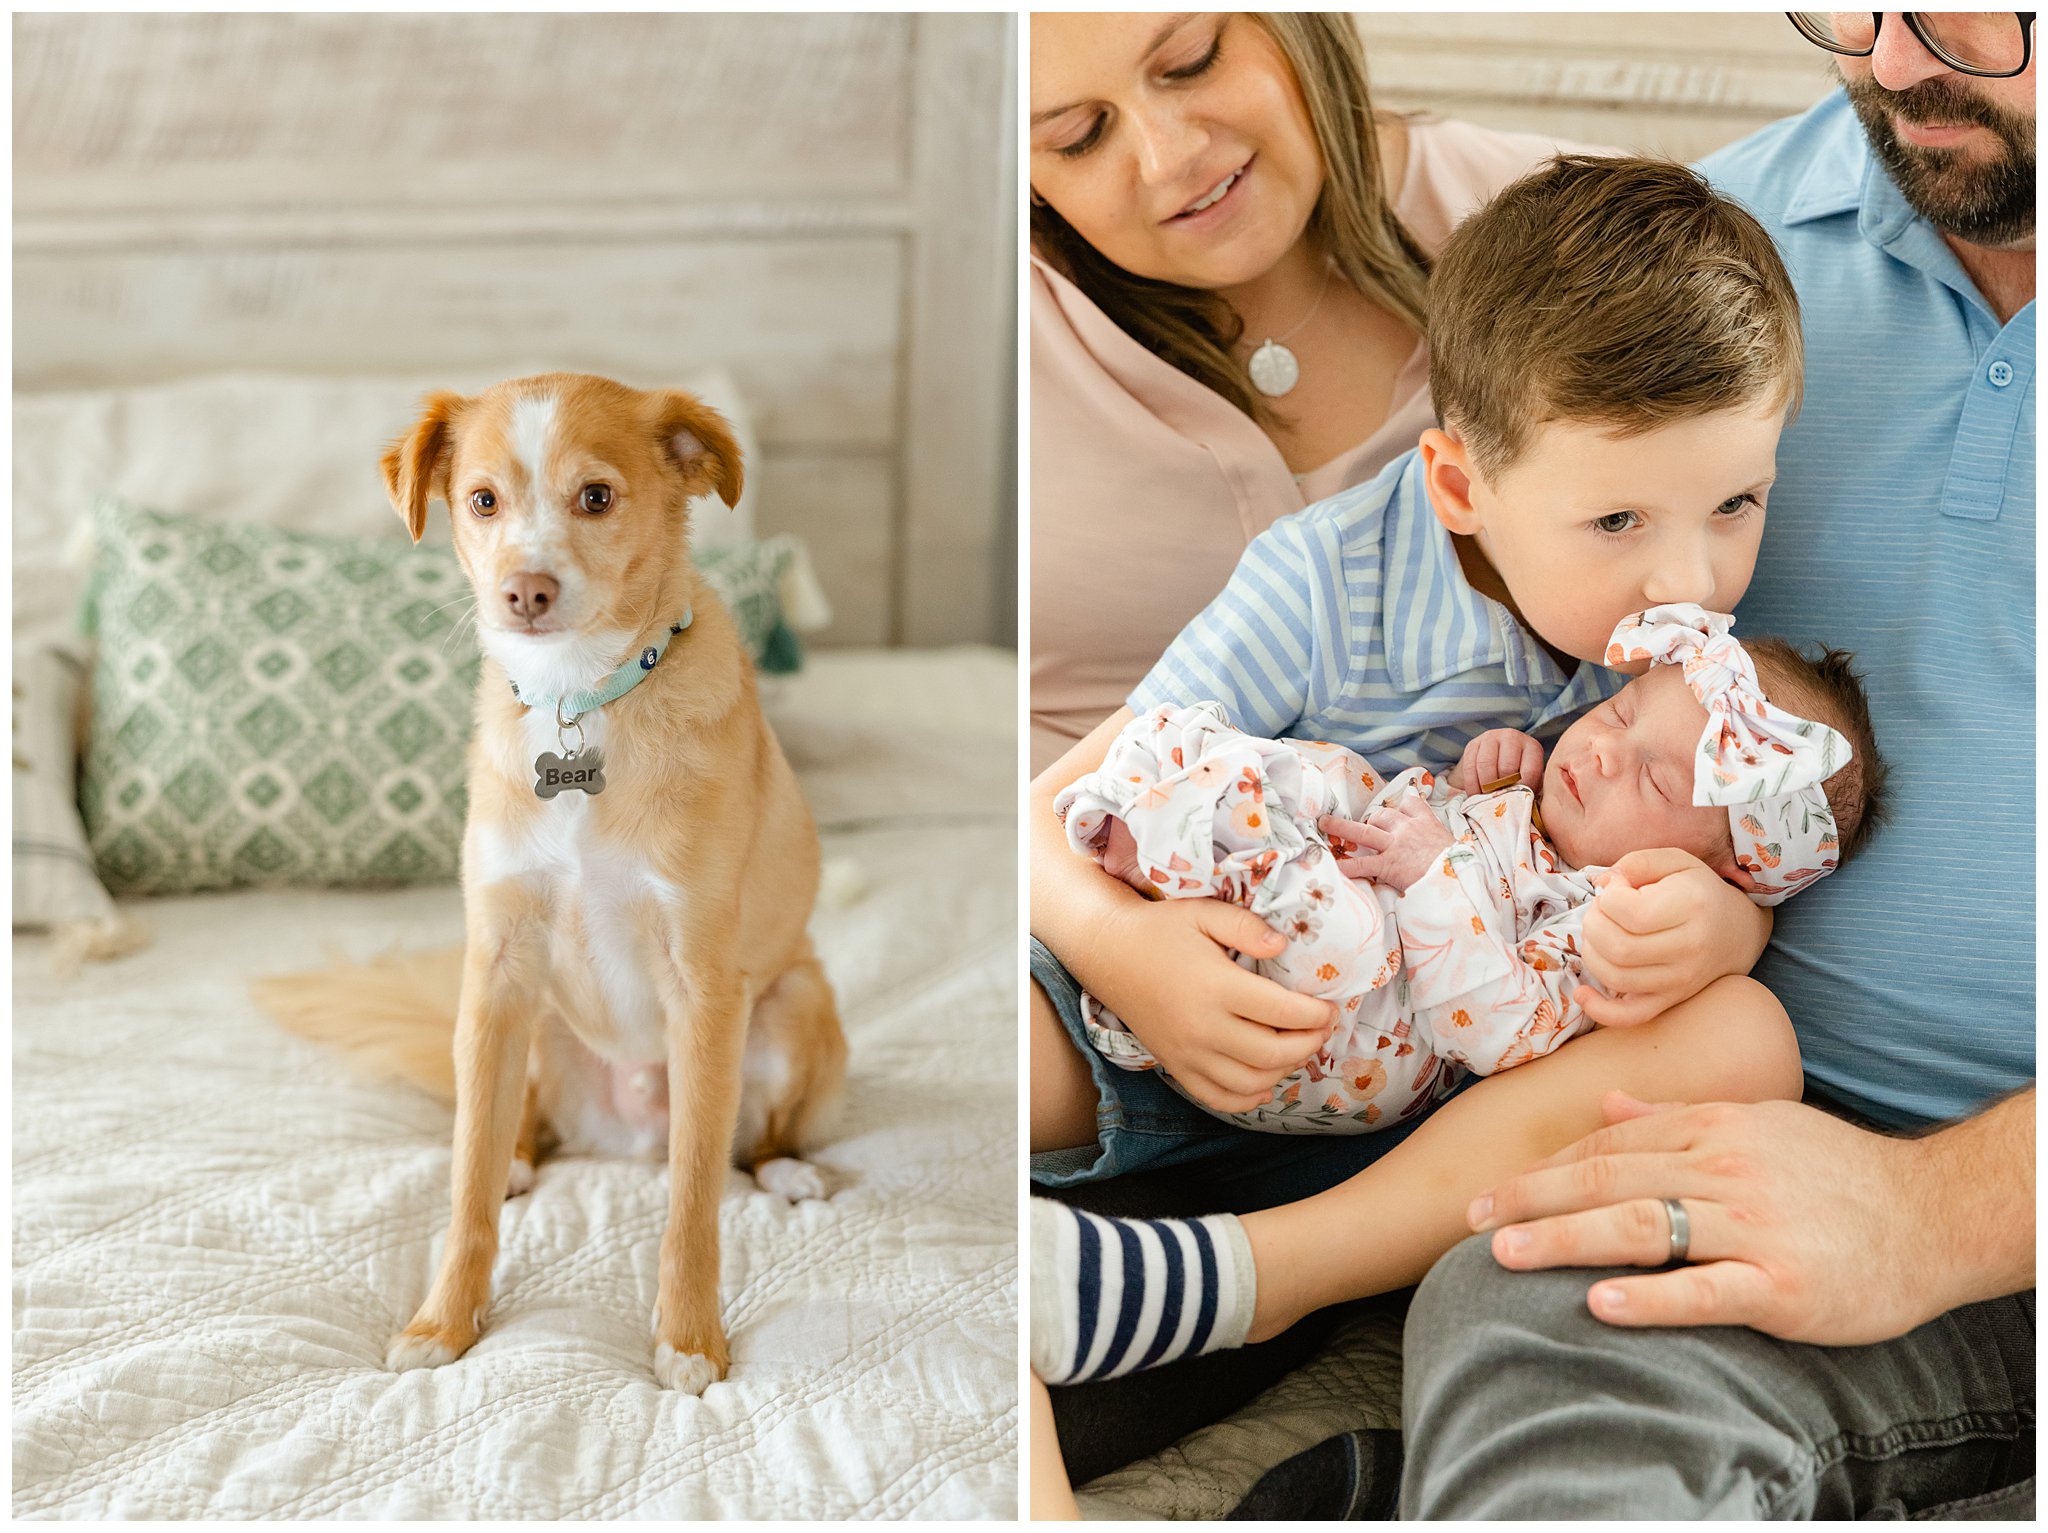 In Home Newborn Lifestyle Session Chico CA Big Brother Bedroom Nursery Dogs,